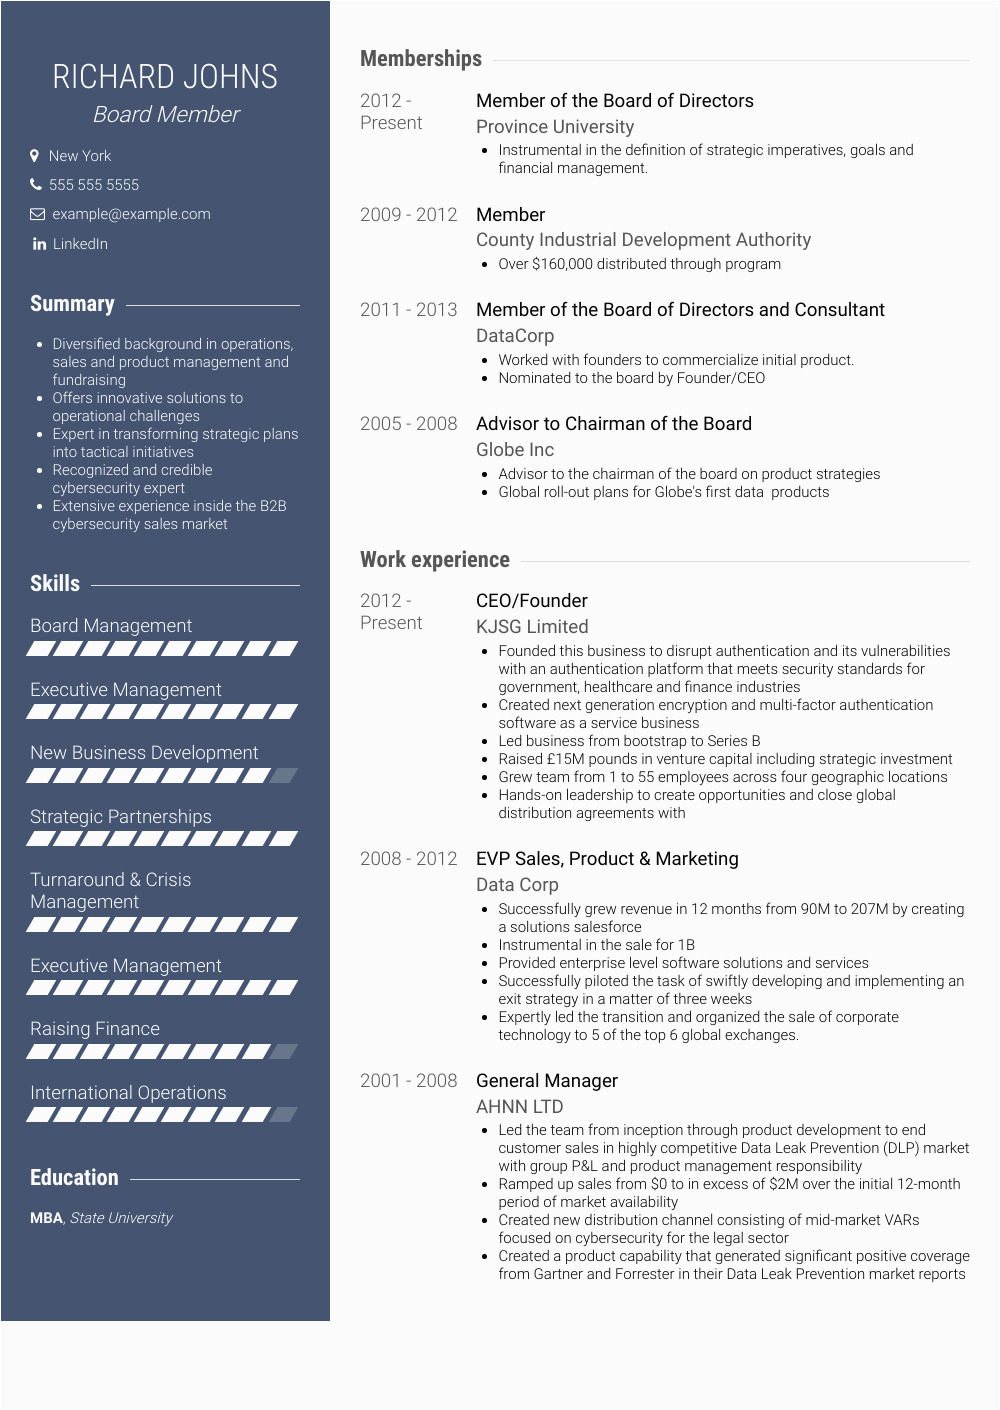 Sample Resume with Board Member Experience Board Member Resume Samples and Templates